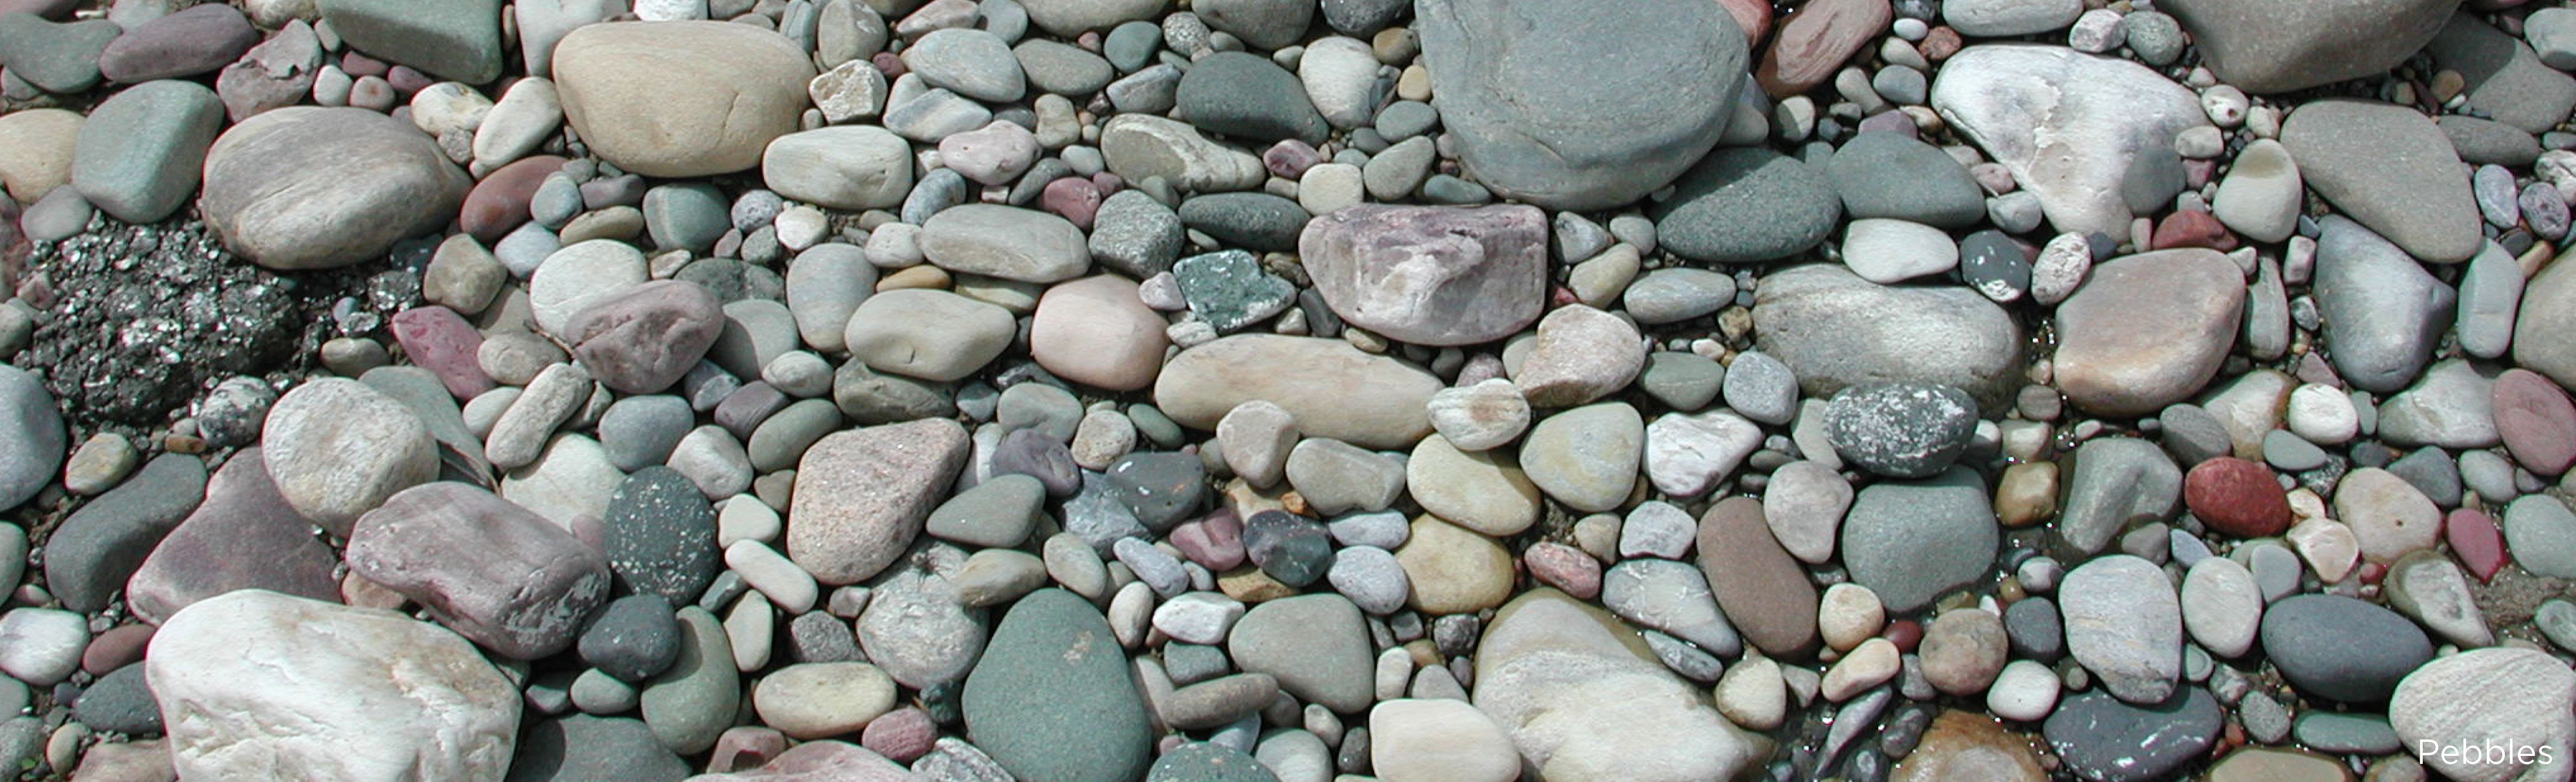 Homepage banner image of pebbles.